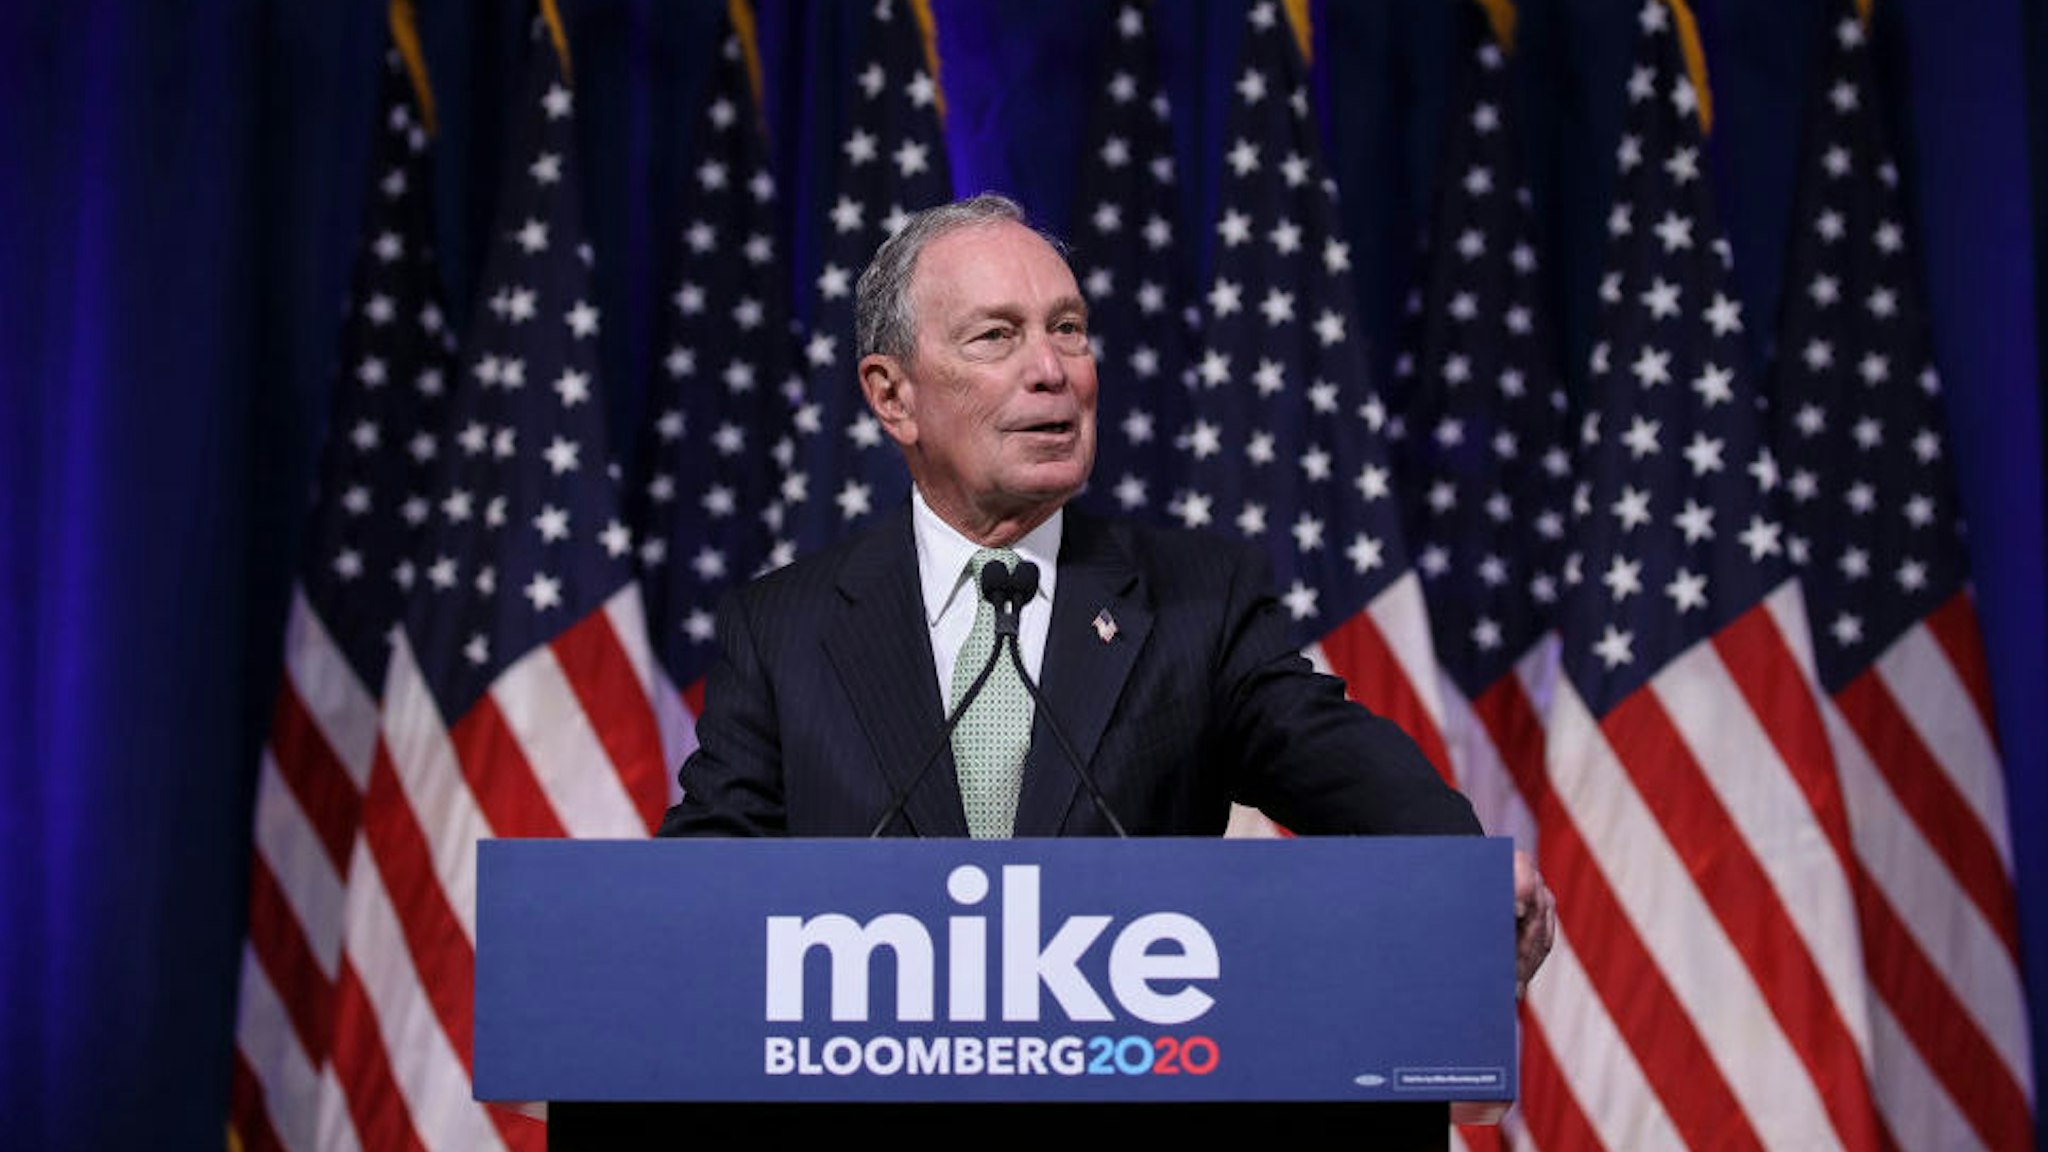 NORFOLK, VA - NOVEMBER 25: Newly announced Democratic presidential candidate, former New York Mayor Michael Bloomberg speaks at a press conference to discuss his presidential run on November 25, 2019 in Norfolk, Virginia. The 77-year old Bloomberg joins an already crowded Democratic field and is presenting himself as a moderate and pragmatic option in contrast to the current Democratic Party's increasingly leftward tilt. In recent years, Bloomberg has used some of his vast personal fortune to push for stronger gun safety laws and action on climate change.